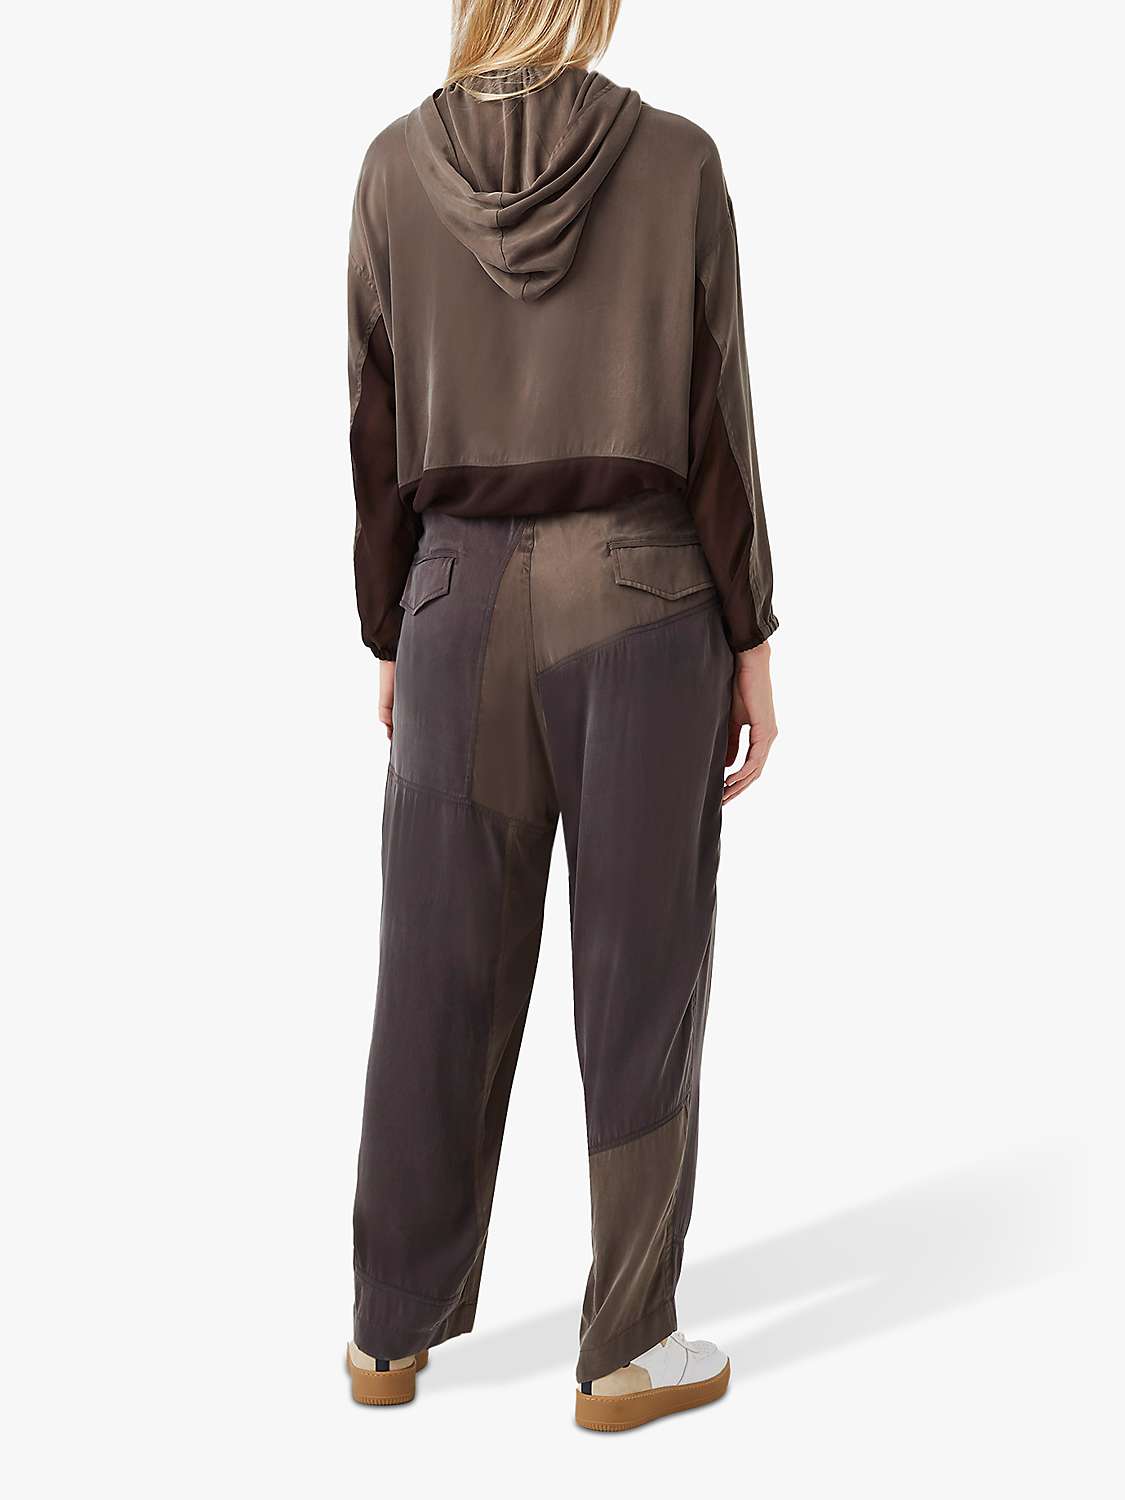 Buy French Connection Altra Colour Block Drape Trousers, Deep Moss/After Dark Online at johnlewis.com